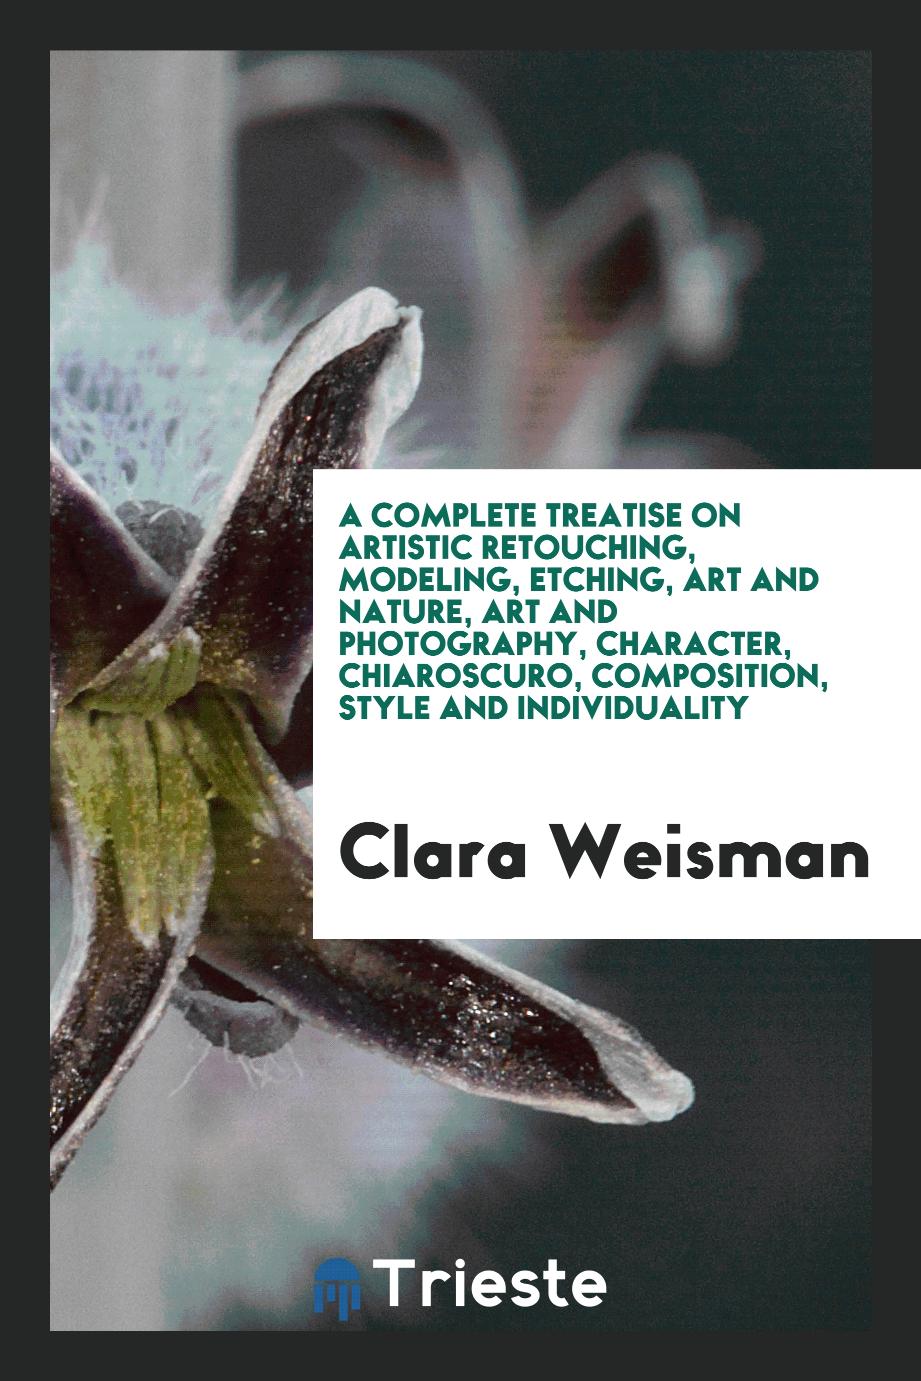 A complete treatise on artistic retouching, modeling, etching, art and nature, art and photography, character, chiaroscuro, composition, style and individuality